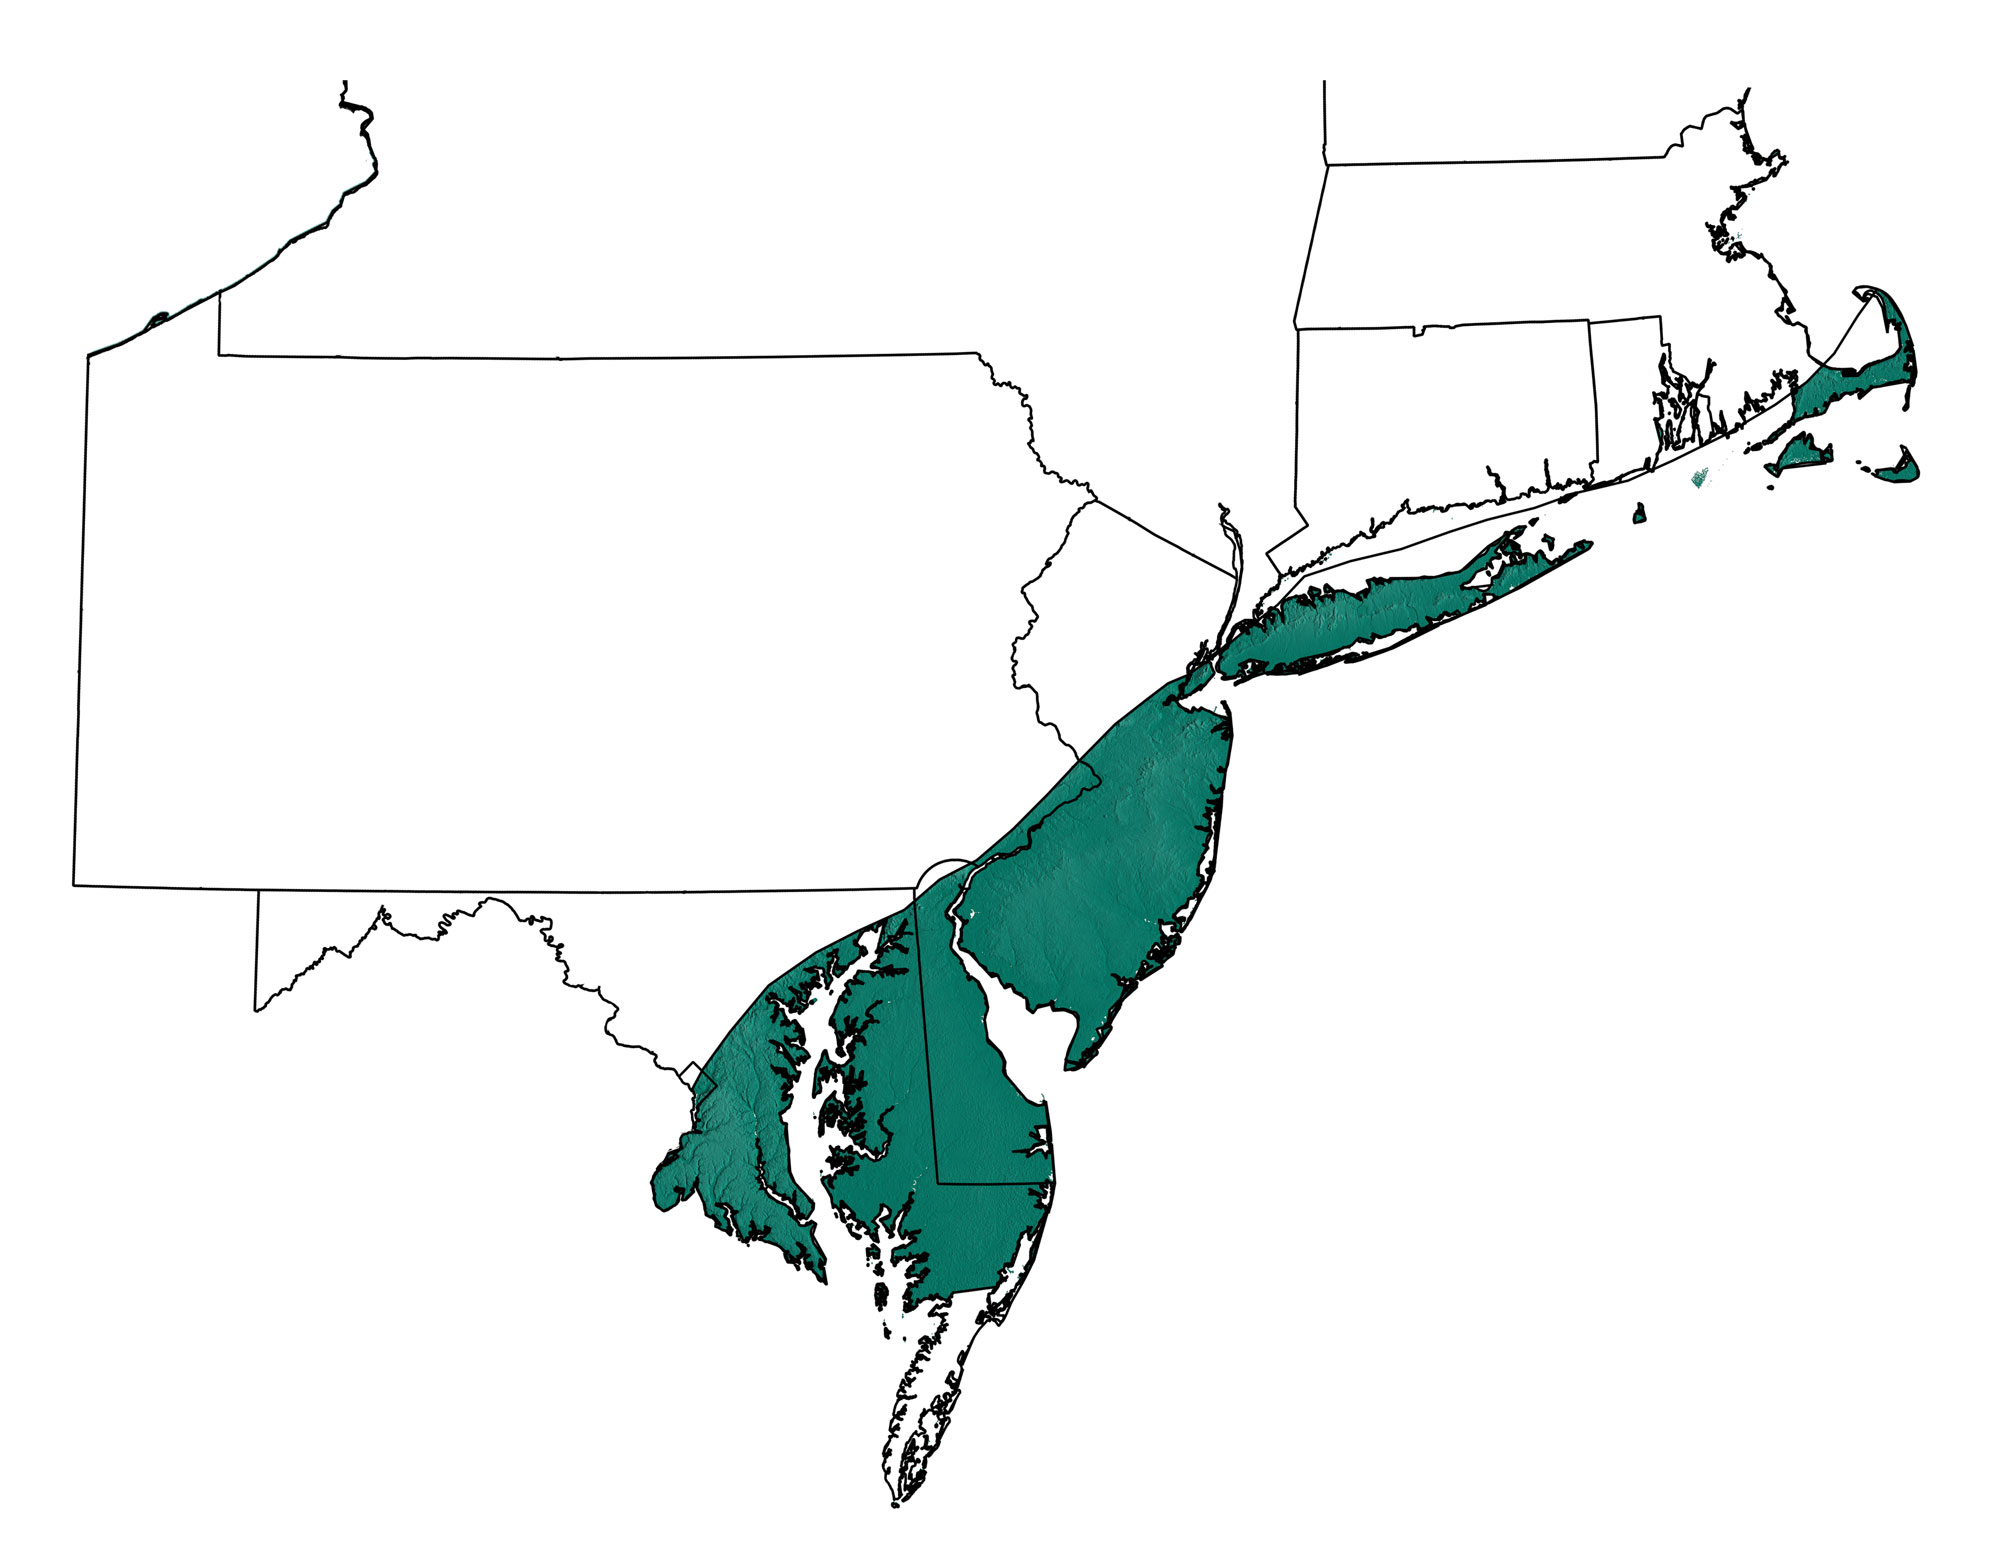 Topographic map showing the region of the northeastern United States occupied by the Coastal Plain.